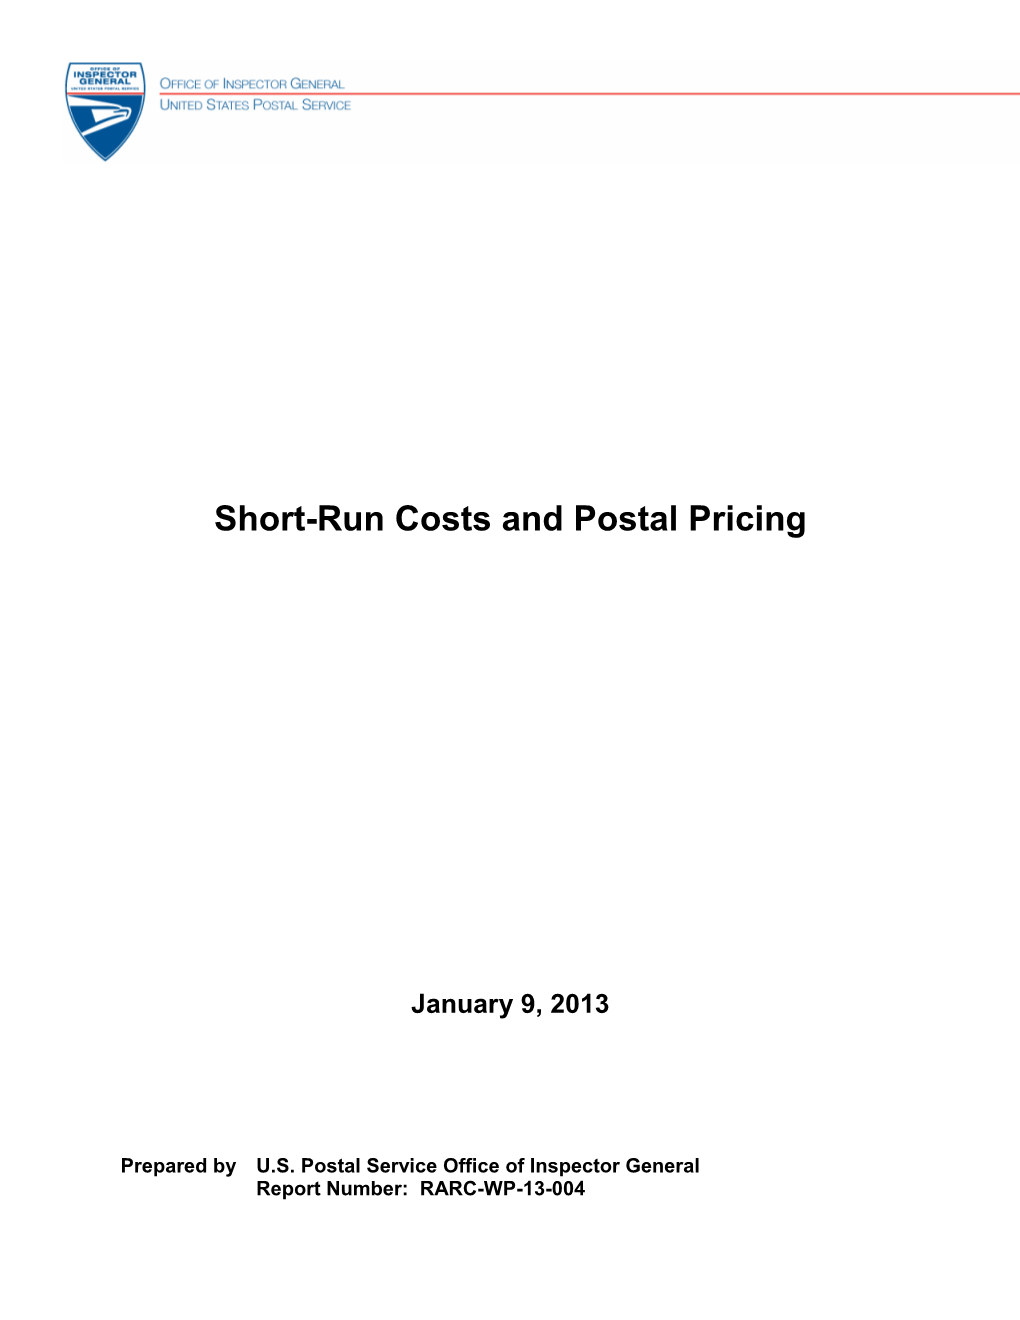 Short-Run Costs and Postal Pricing